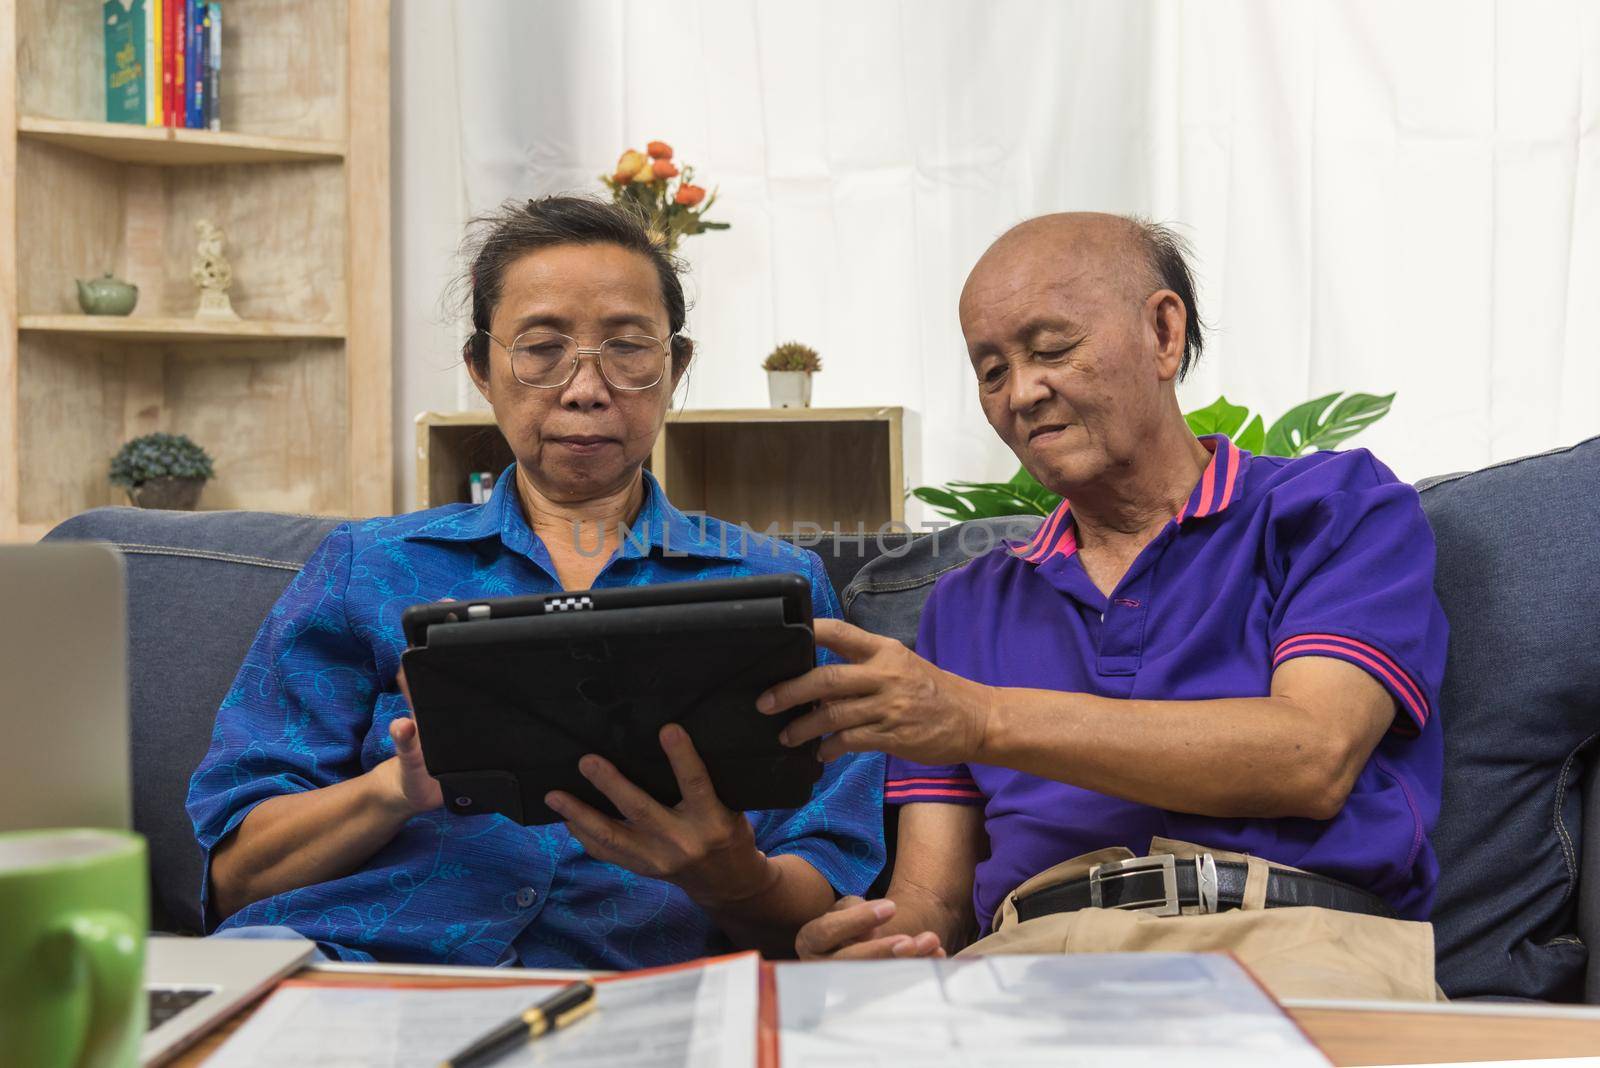 Elderly Asians use tablets and insurance documents at home. by aoo3771